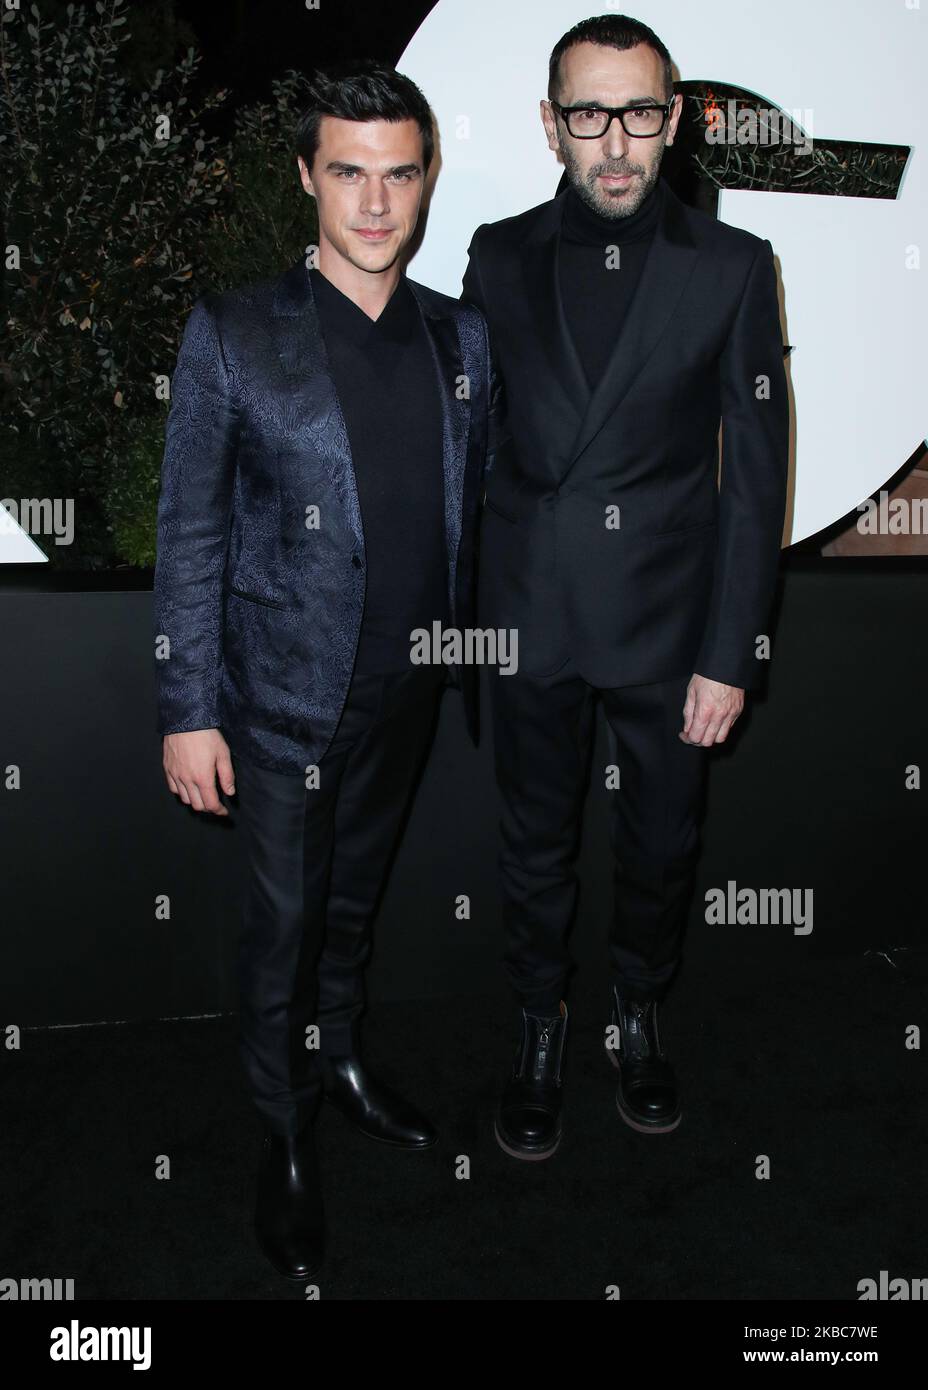 WEST HOLLYWOOD, LOS ANGELES, CALIFORNIA, USA - DECEMBER 05: Finn Wittrock and Alessandro Sartori arrive at the 2019 GQ Men Of The Year Party held at The West Hollywood EDITION Hotel on December 5, 2019 in West Hollywood, Los Angeles, California, United States. (Photo by Xavier Collin/Image Press Agency/NurPhoto) Stock Photo